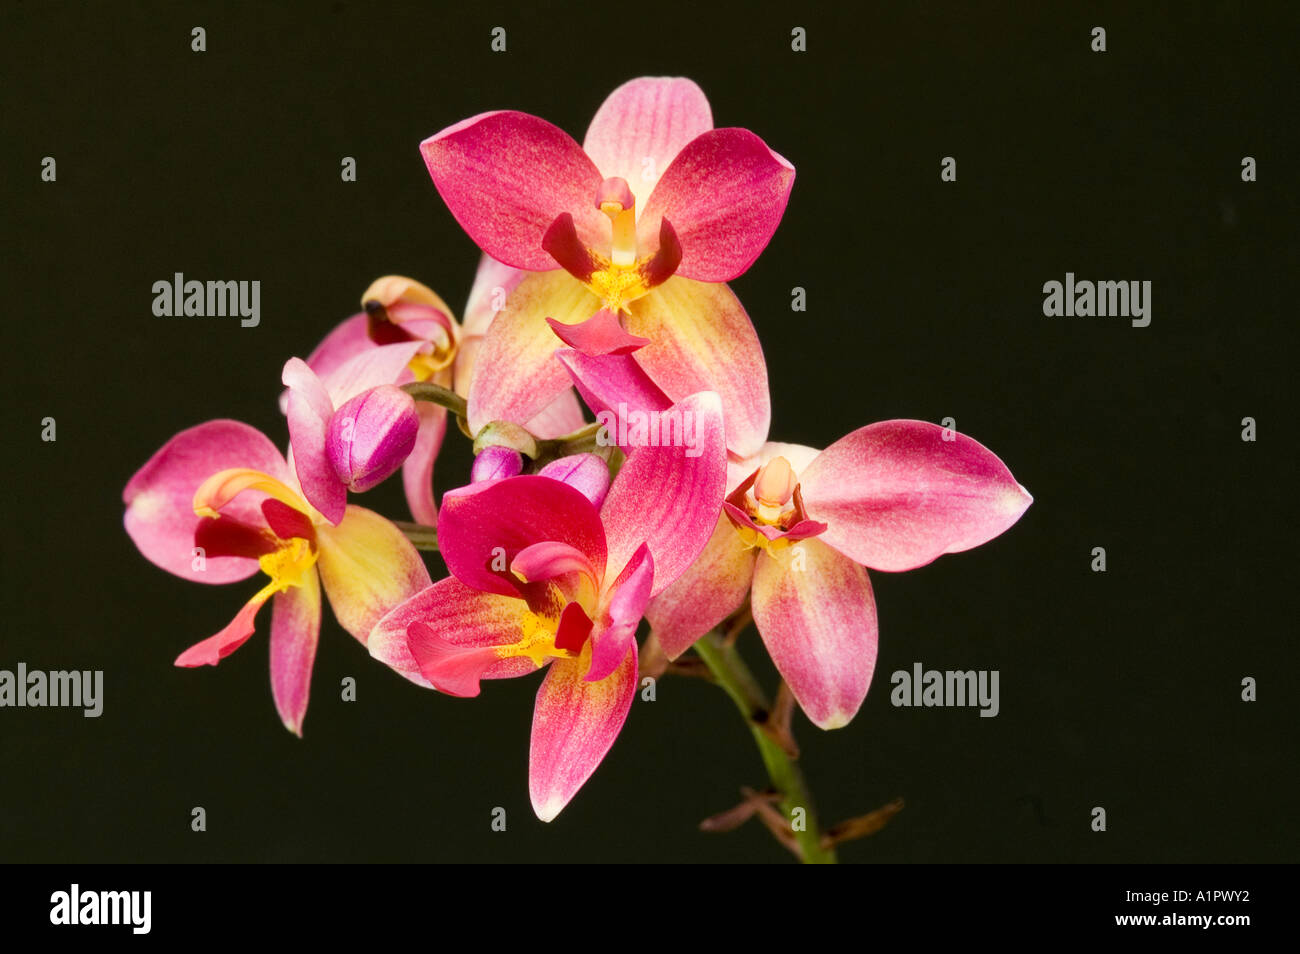 S. Premier orchid on black background Stock Photo